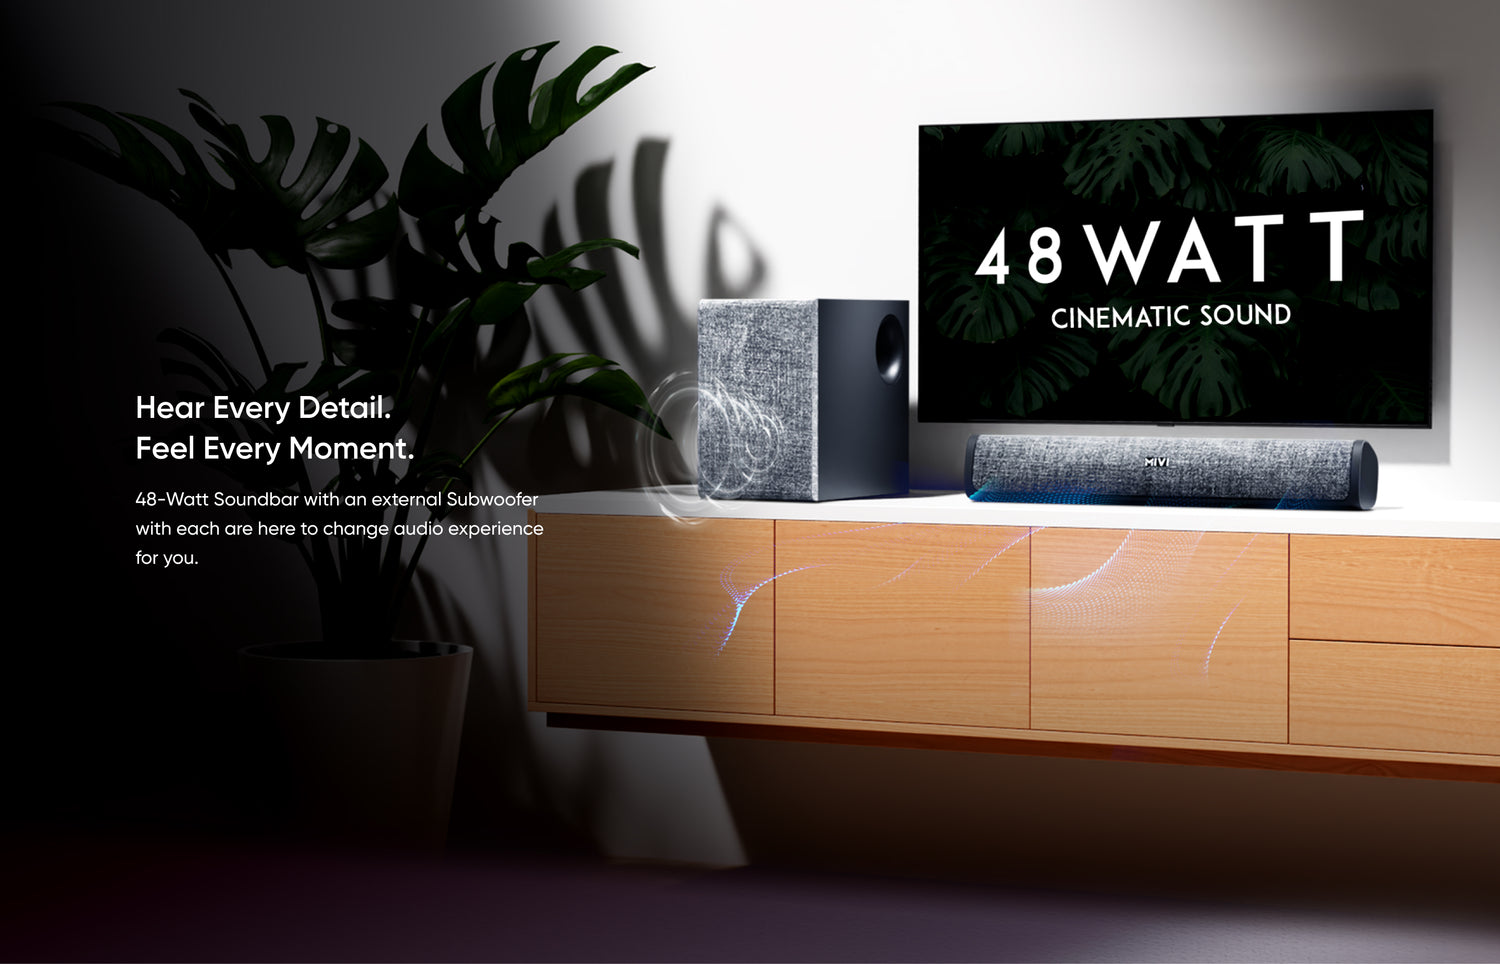 Hear Every Detail. Feel Every Moment. 48-Watt Soundbar with an external Subwoofer with each are here to change audio experience for you.